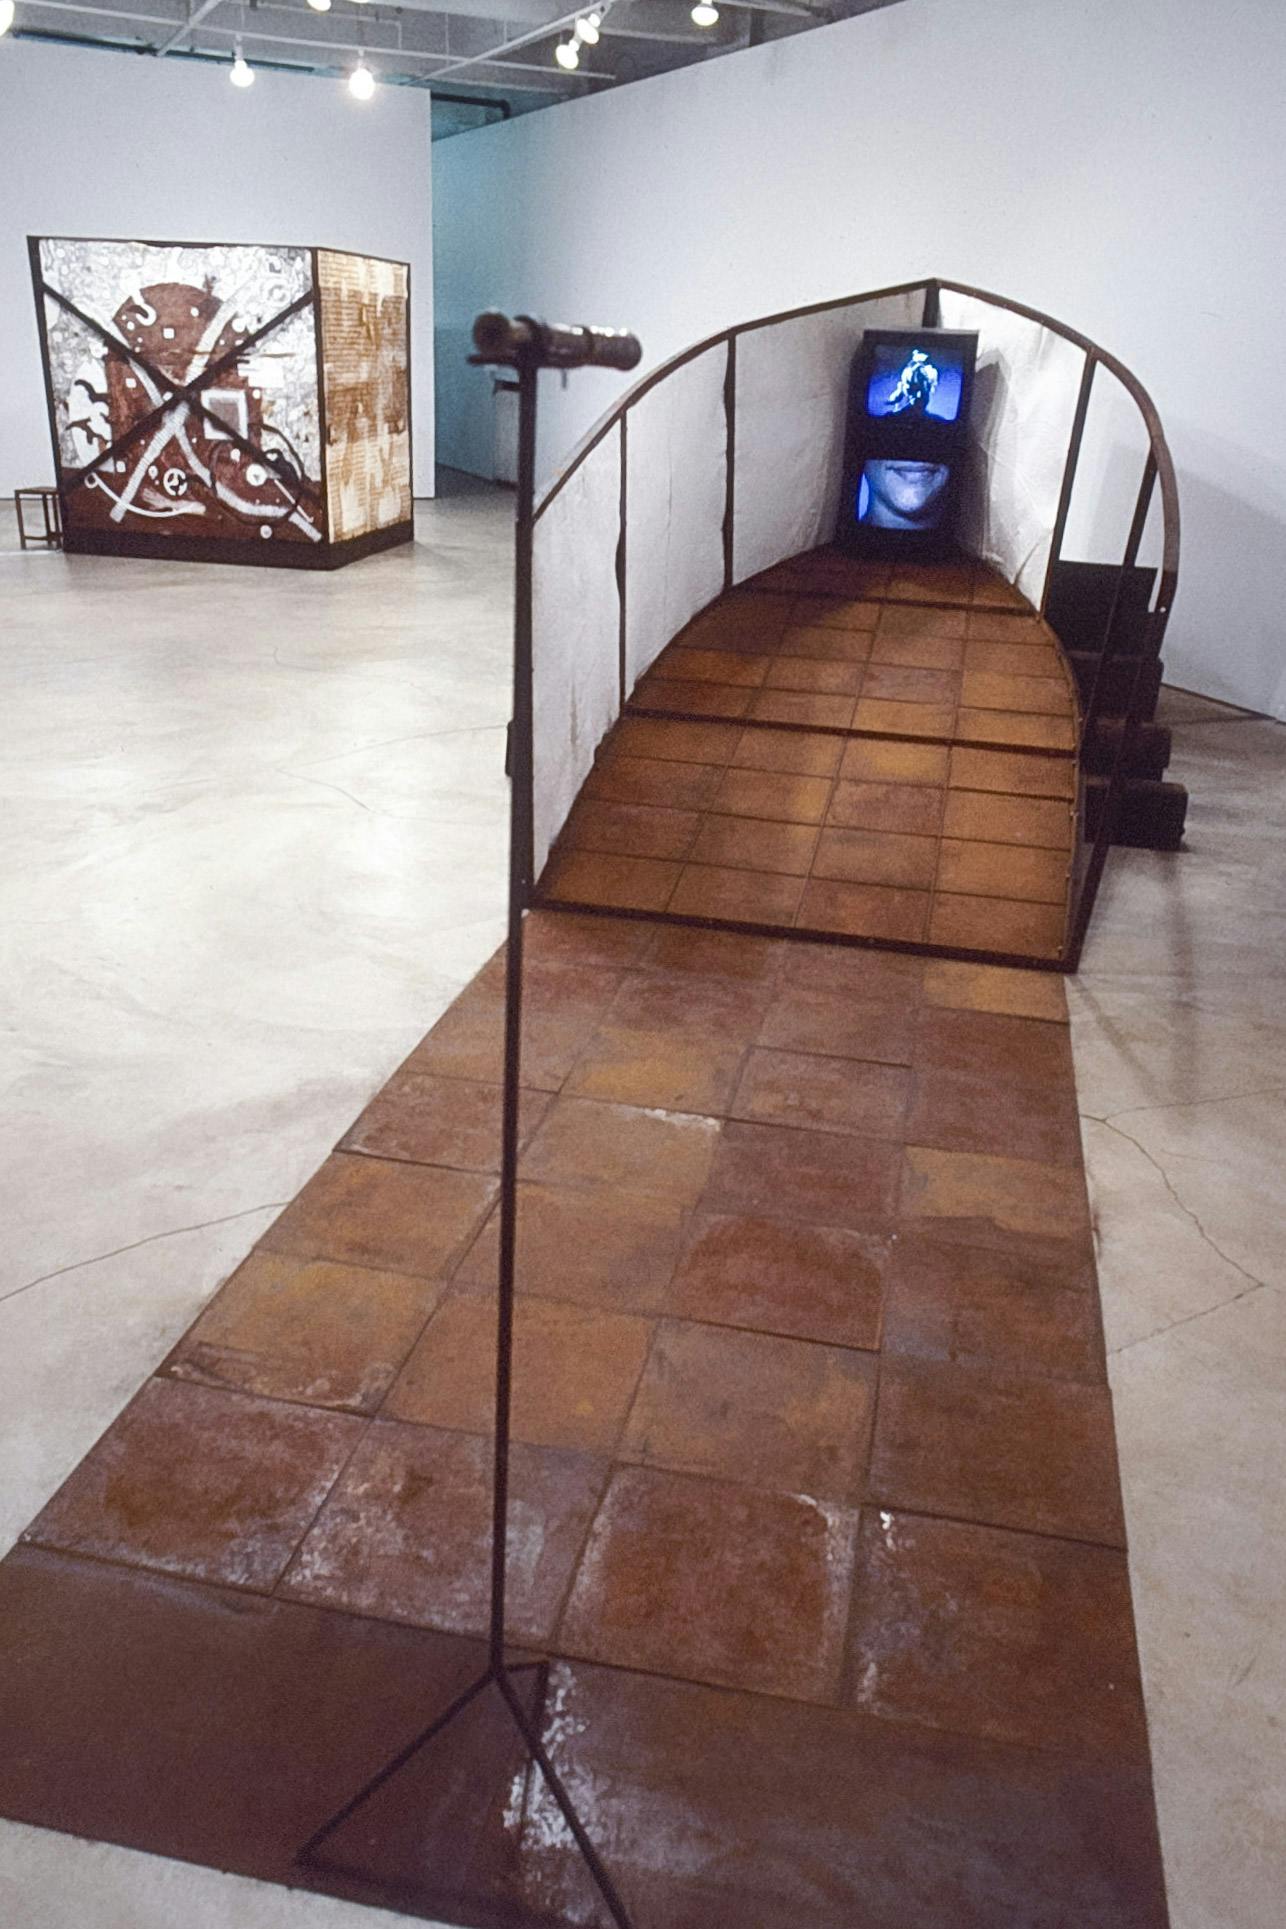 Two large sculptures are installed in the gallery. A white boat head with wood tile flooring is placed in the front. Two CRT TVs are placed on the boat. A cubical-shaped sculpture is in the back.